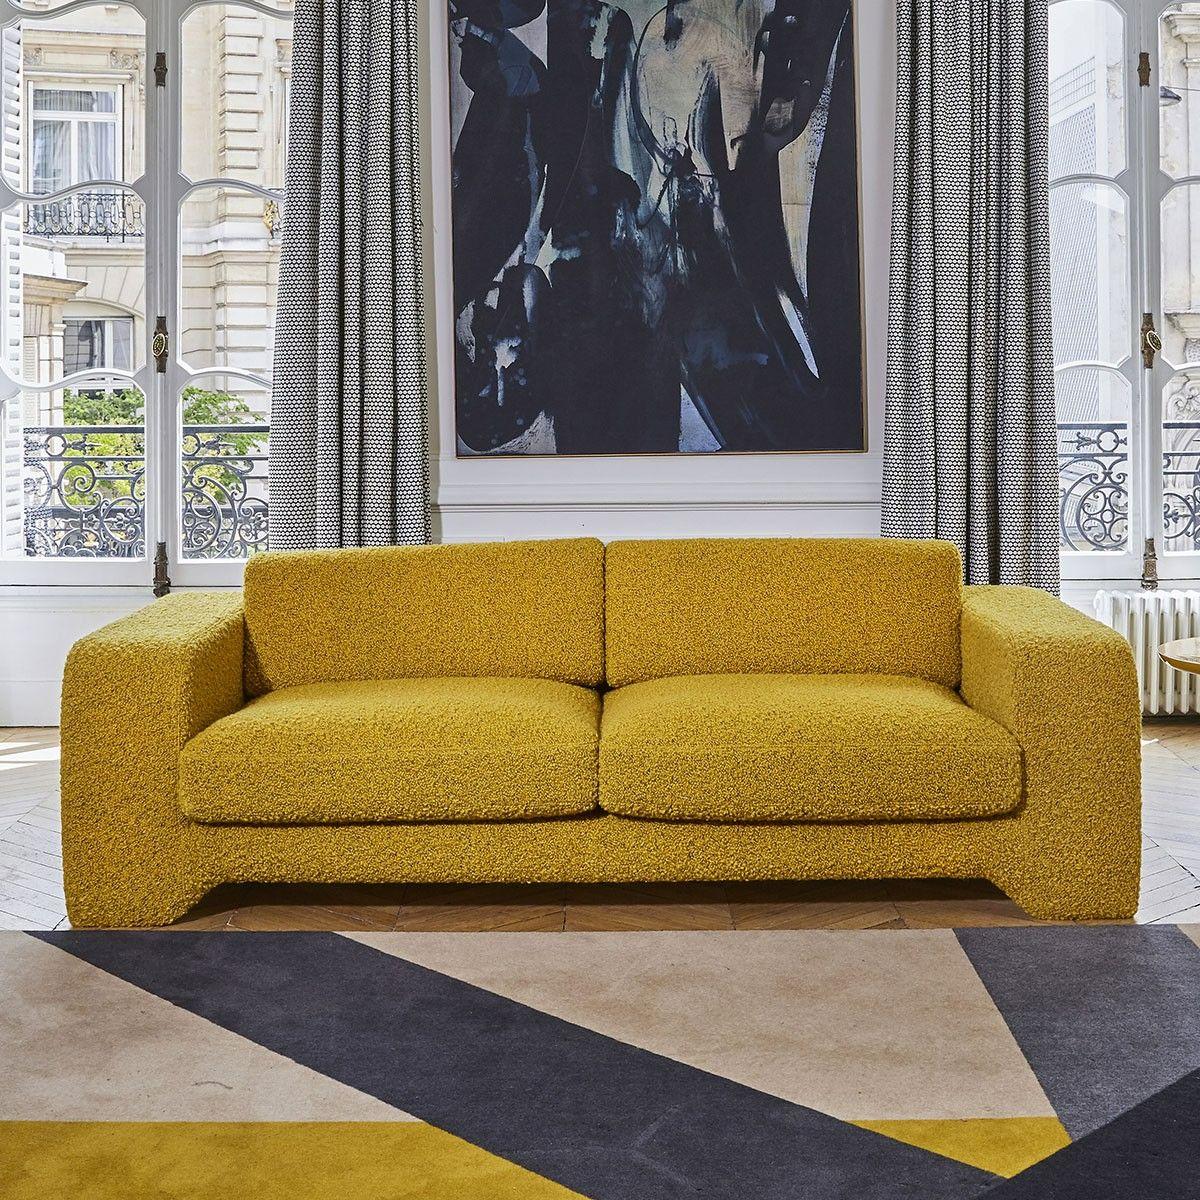 Popus Editions Giovanna 3 seater sofa in cognac como velvet upholstery.

Giovanna is a sofa with a strong profile. A sober, plush line, with this famous detail that changes everything, so as not to forget its strength of character and this